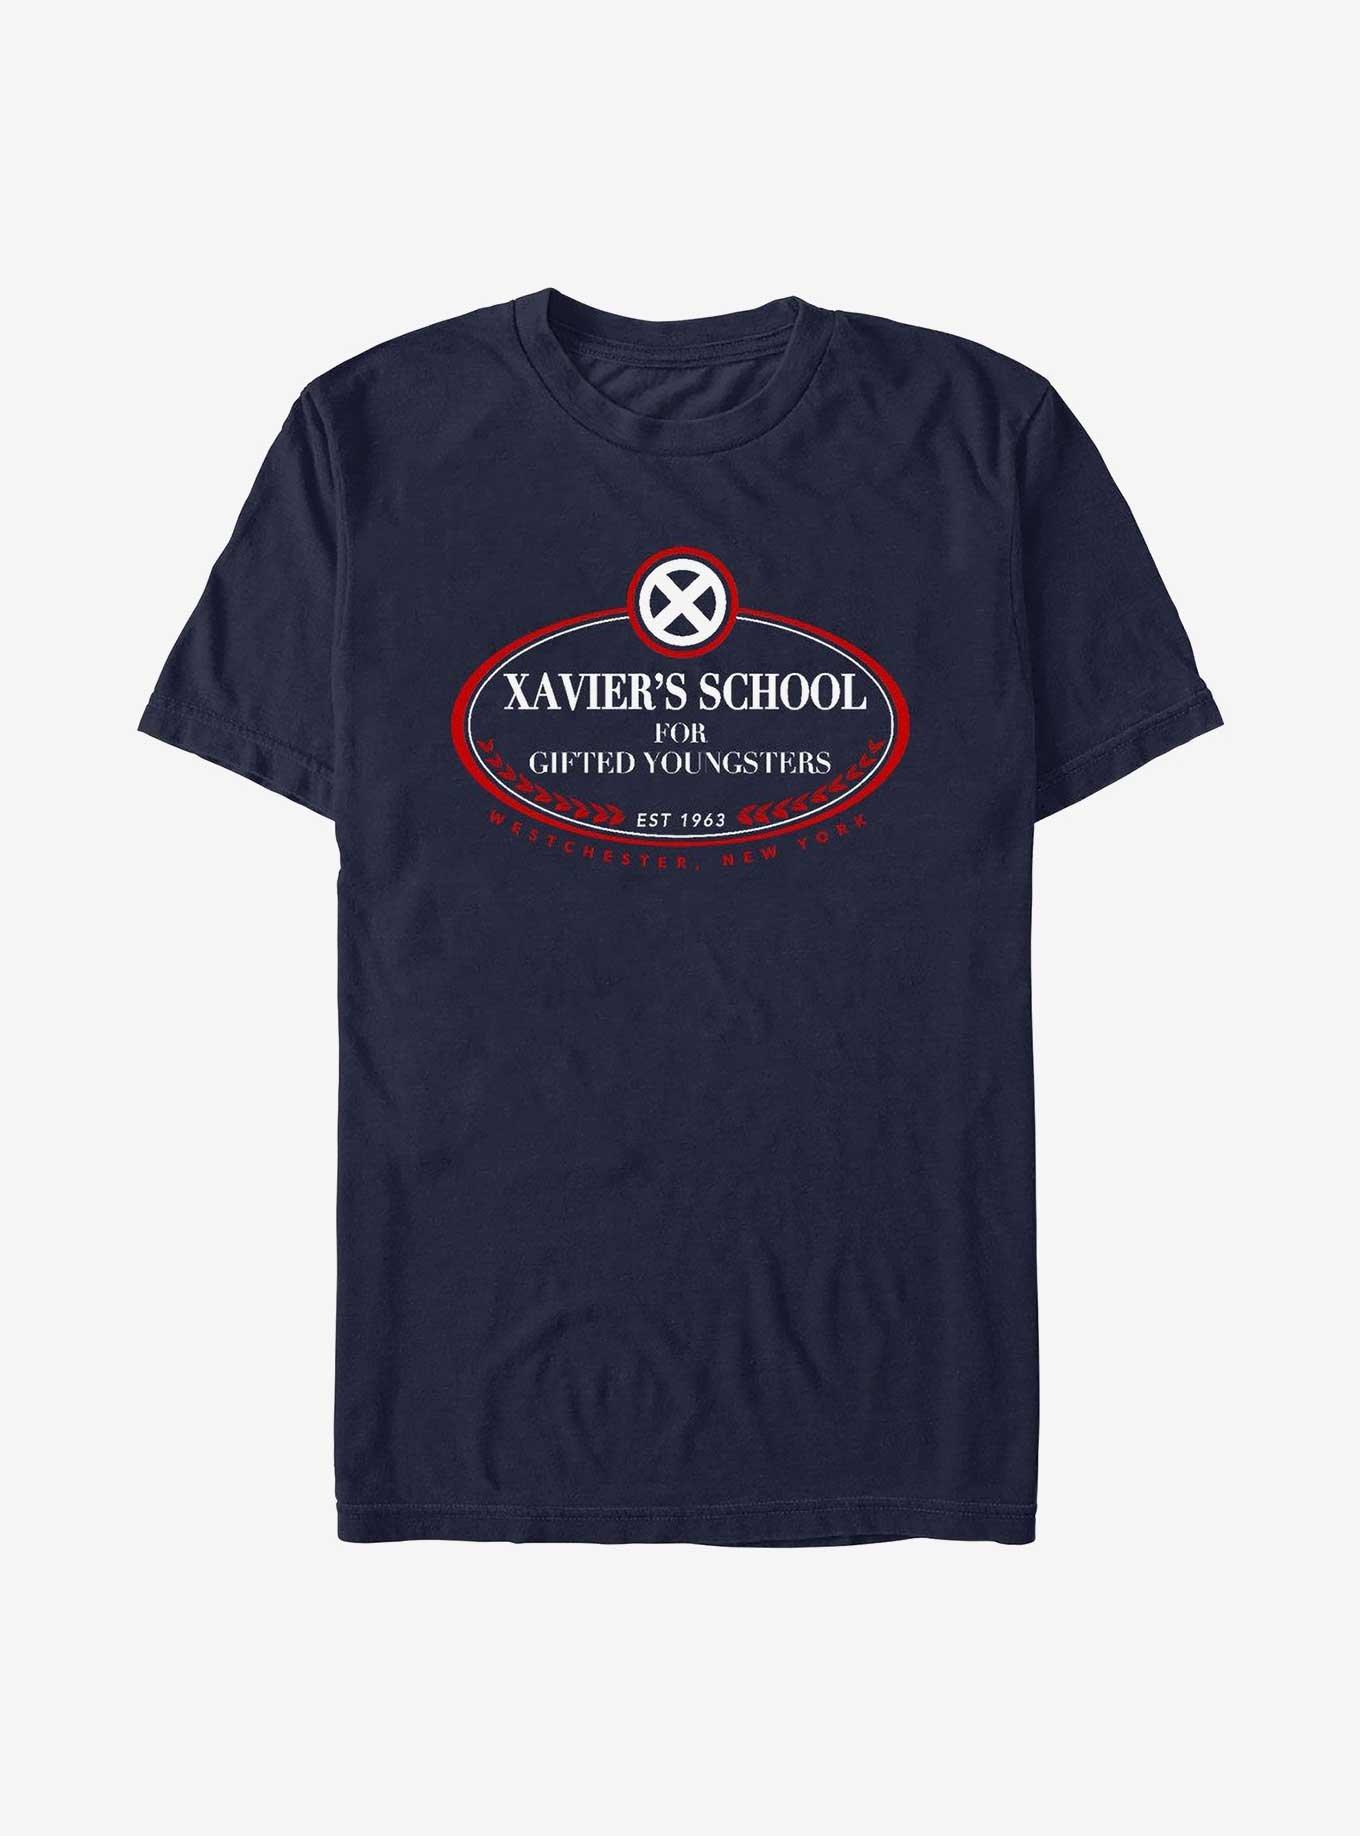 Marvel X-Men Xaviers School For Gifted Youngsters T-Shirt, NAVY, hi-res